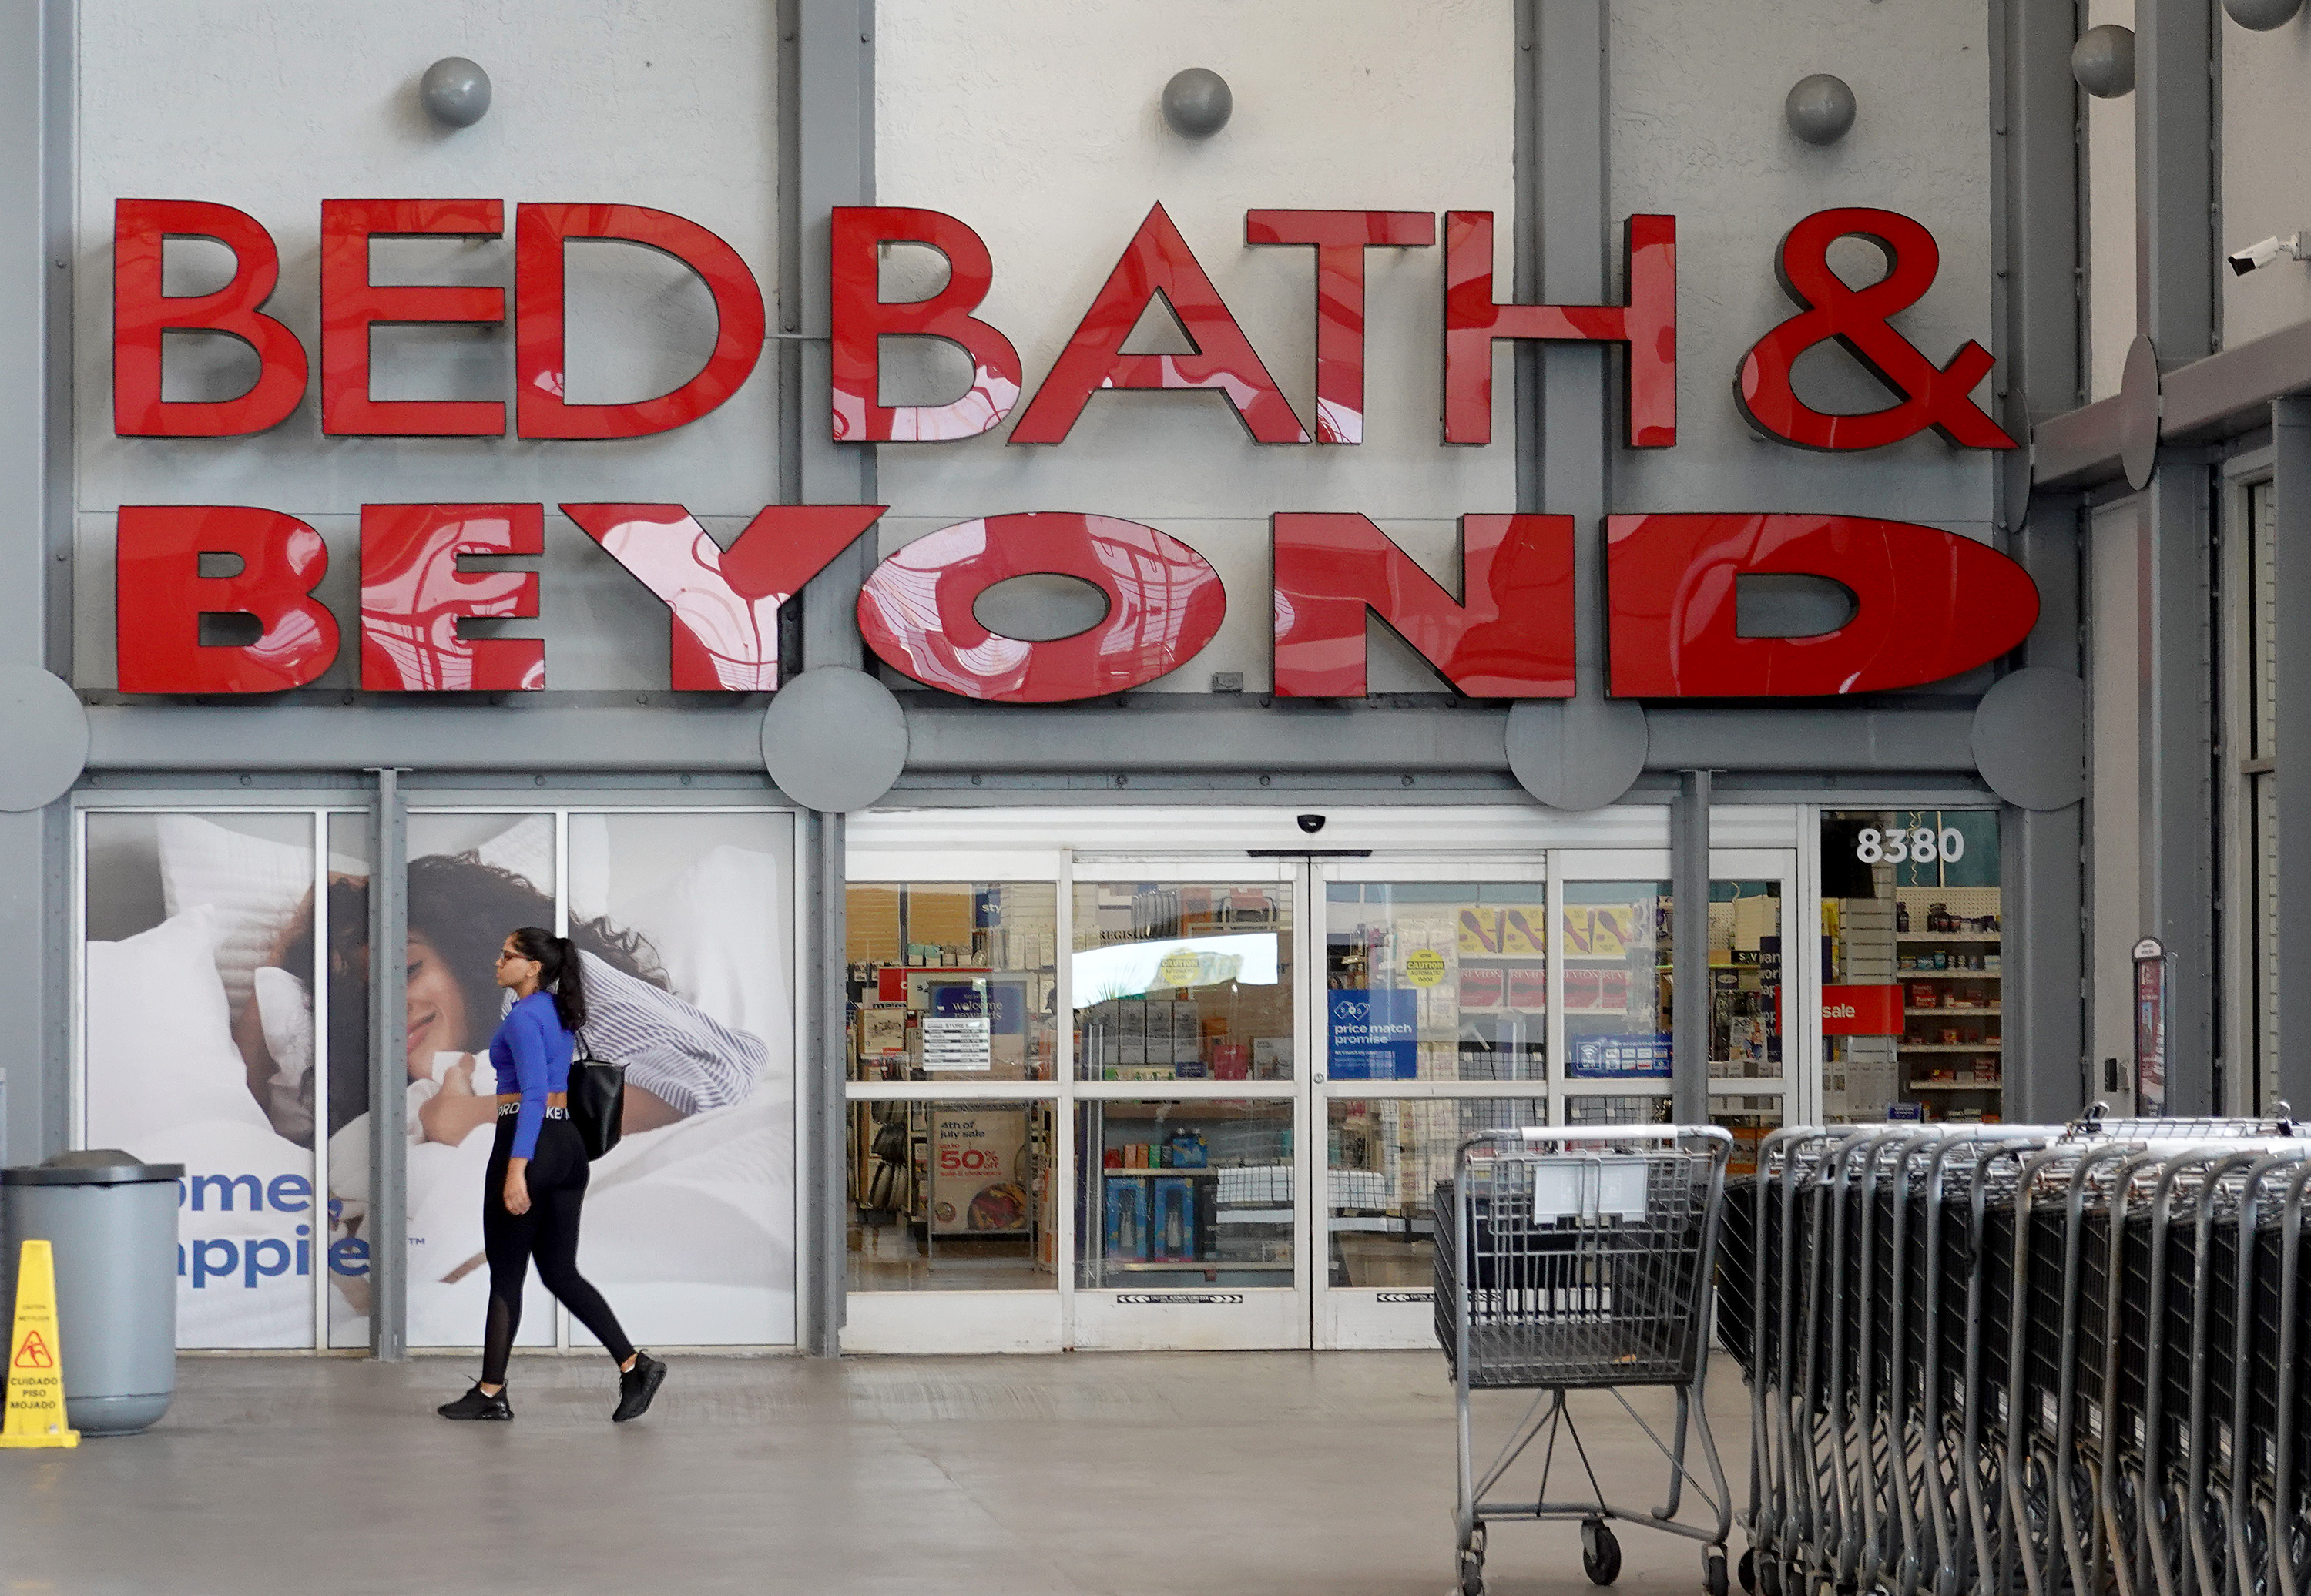 Bed Bath & Beyond bankruptcy poised to boost online retailers Wayfair, Overstock: Analyst